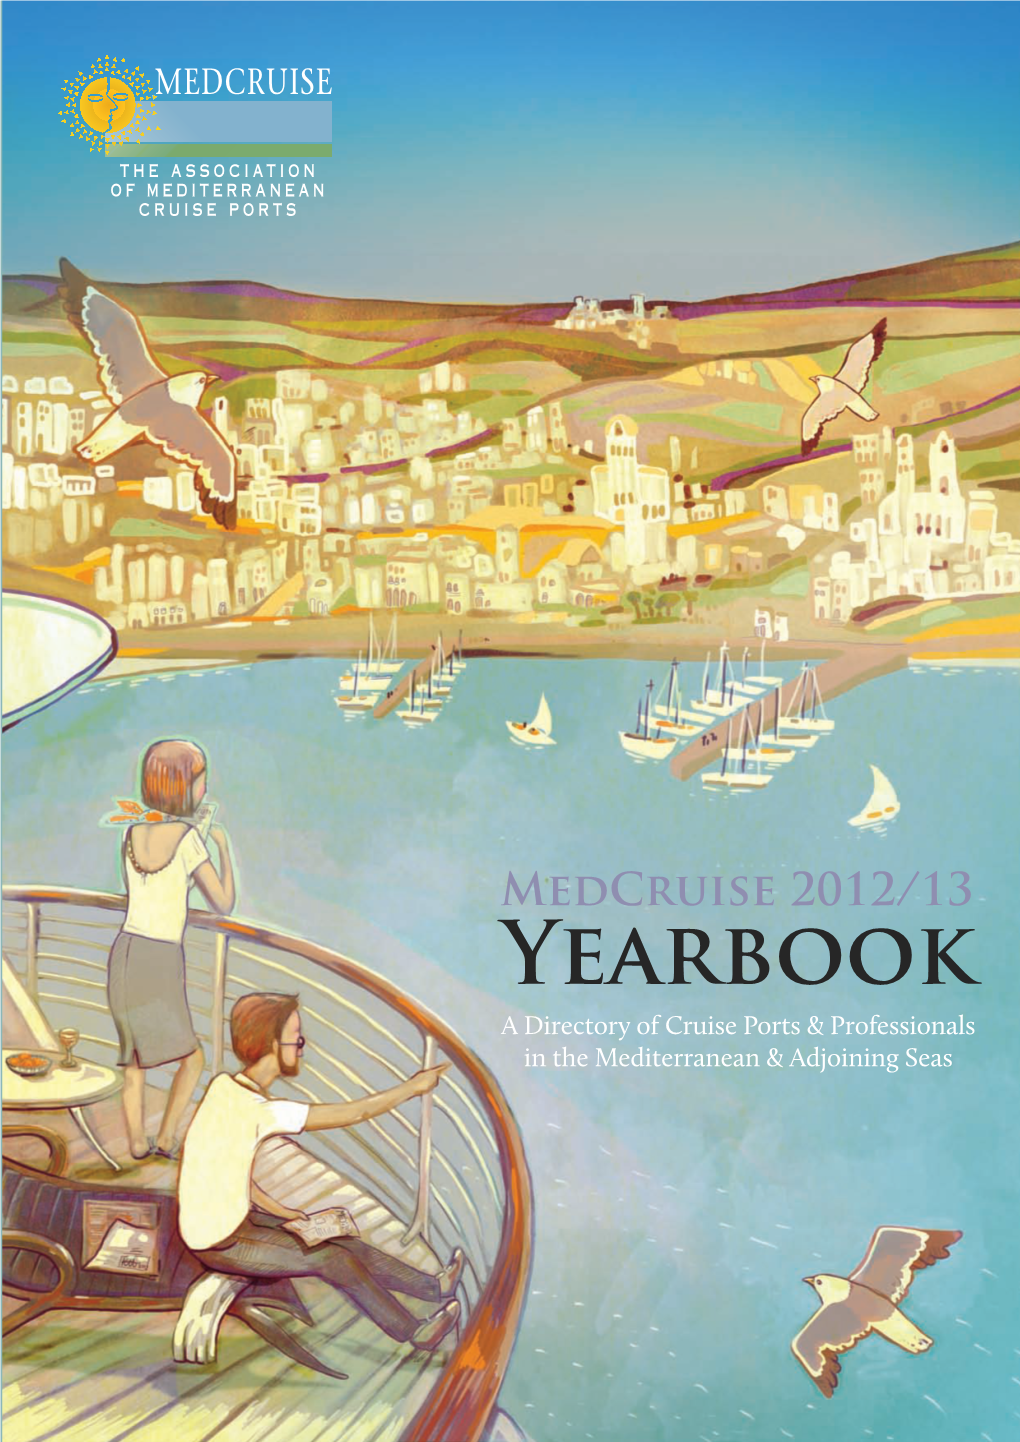 Medcruise YB 12-13 Cover 20/02/2012 14:15 Page 1 Medcruise 2012/13 Yearbook